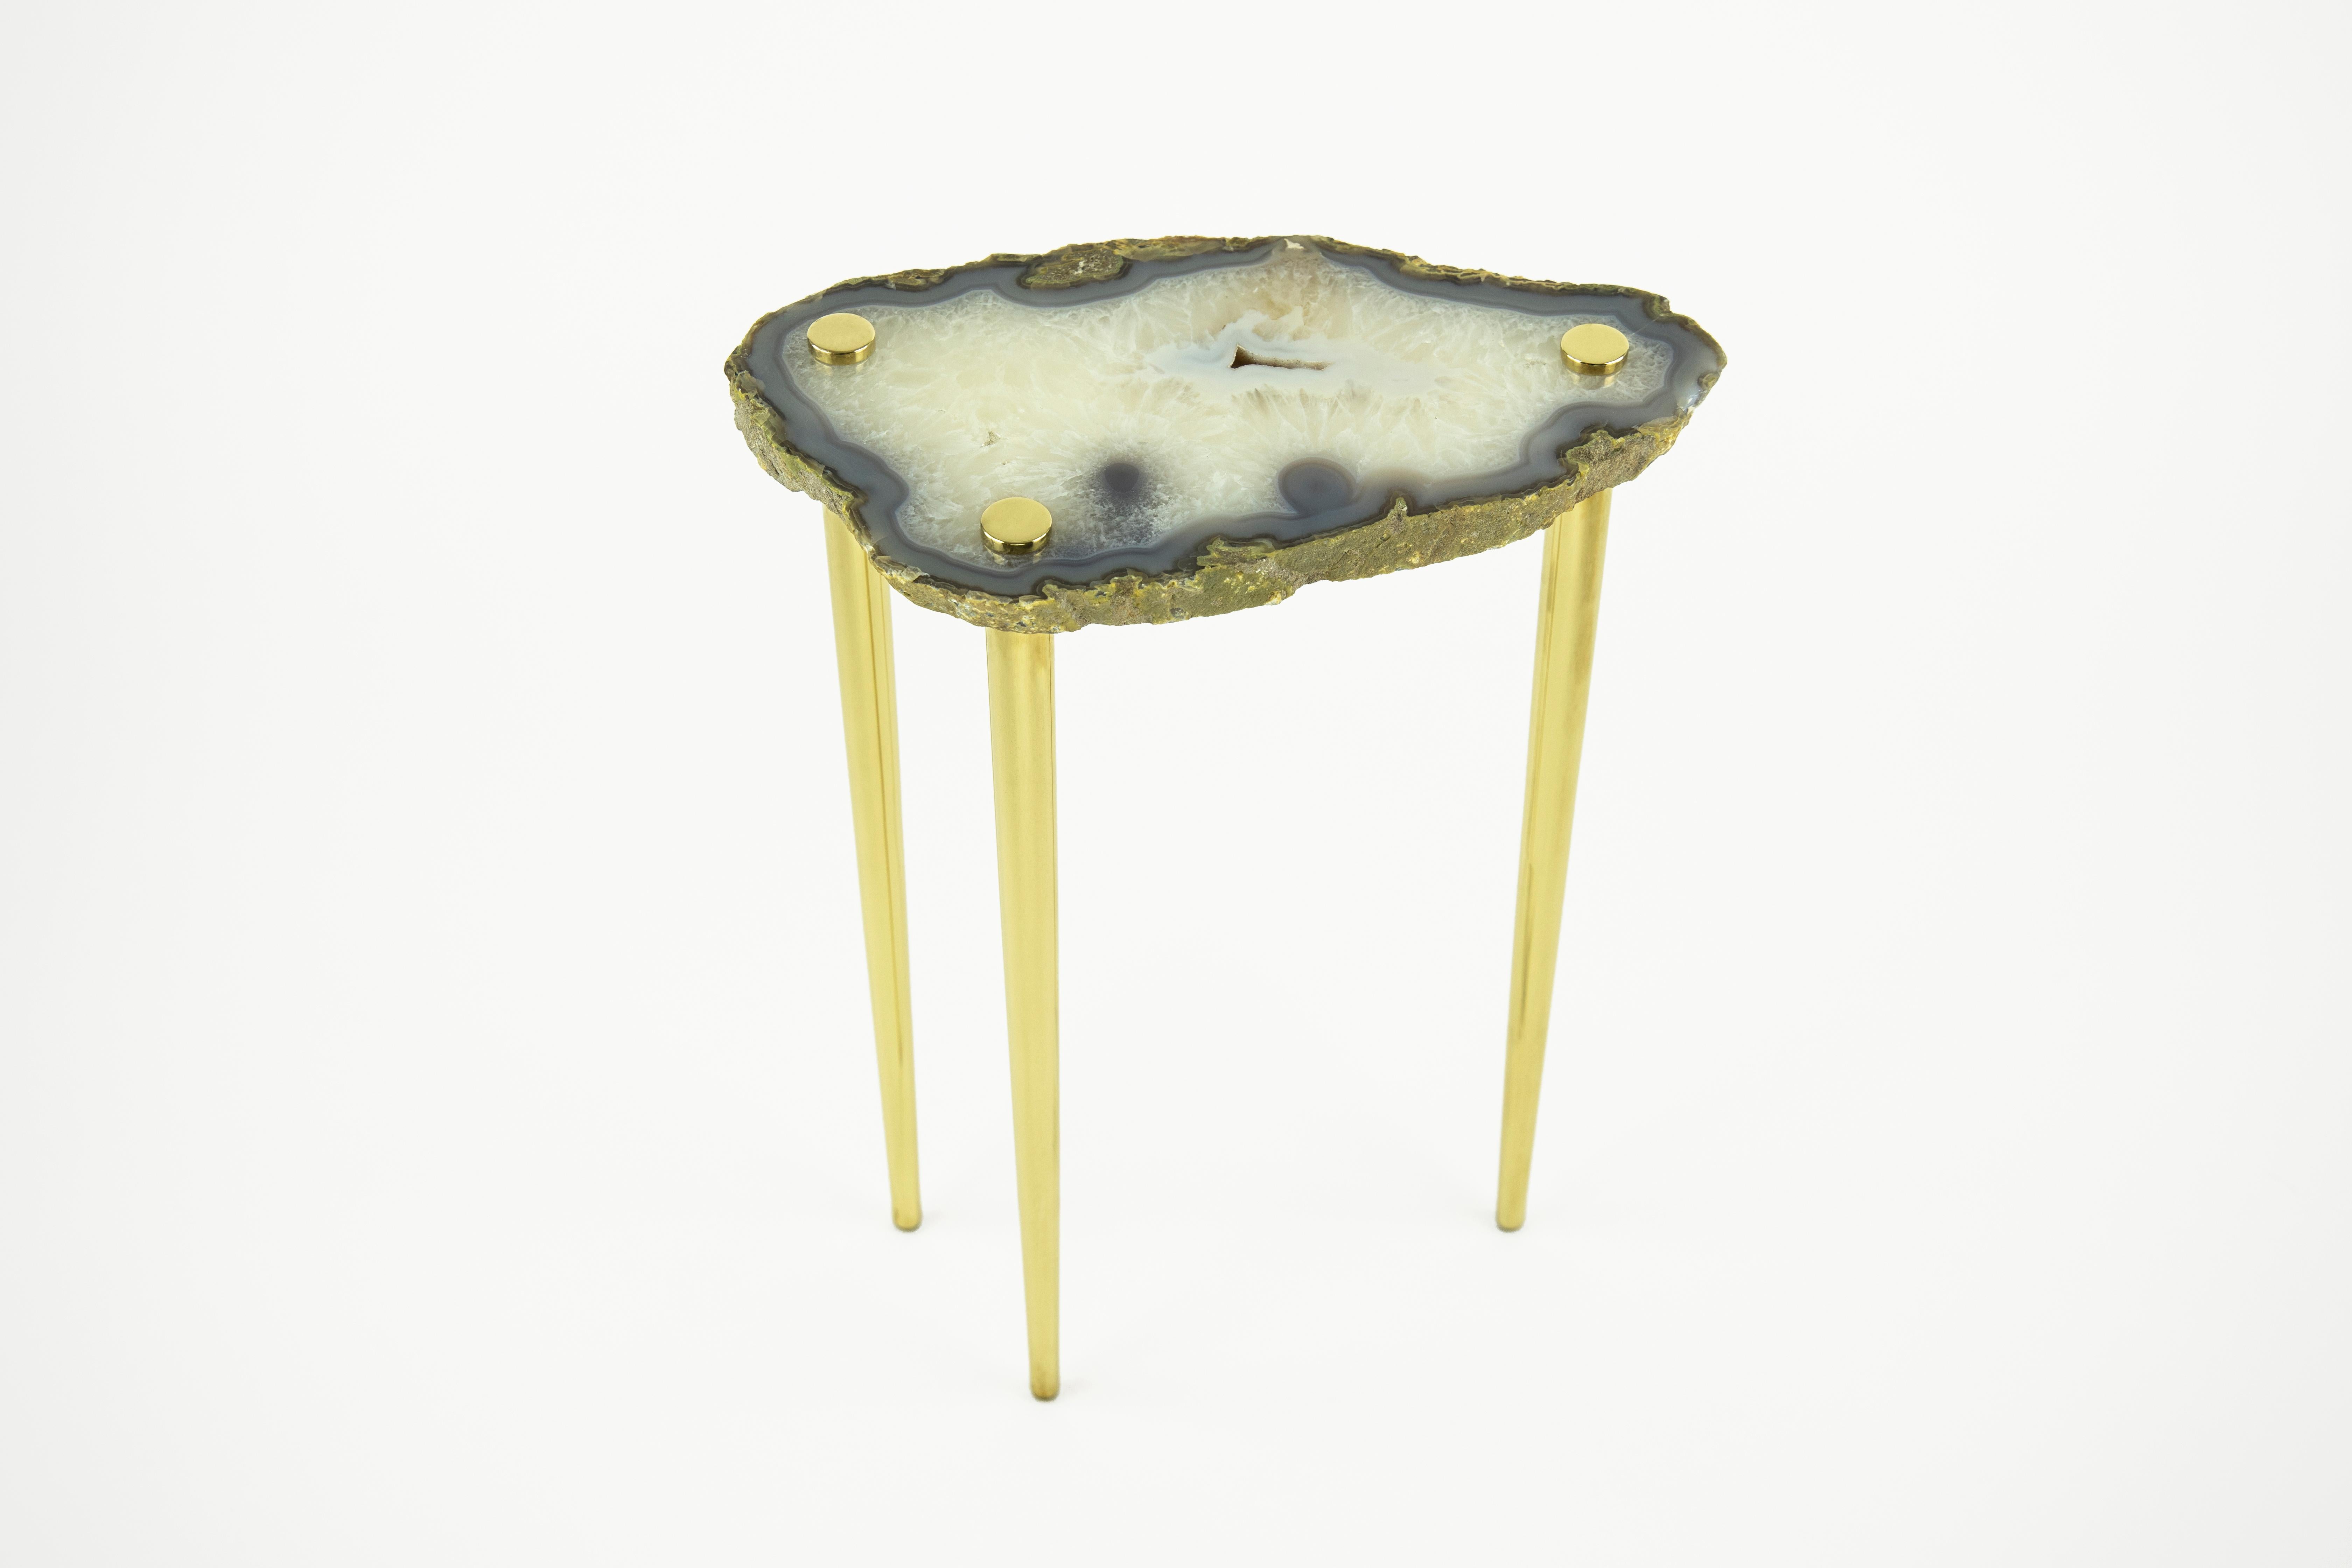 Zoom in and get lost in the beauty of these high-polished natural quartz crystal table tops pierced by solid brass legs. The 'Powers of 10' Tables are durable, heavy, and one-of-a-kind. Each one has a unique shape and other worldly color palette.